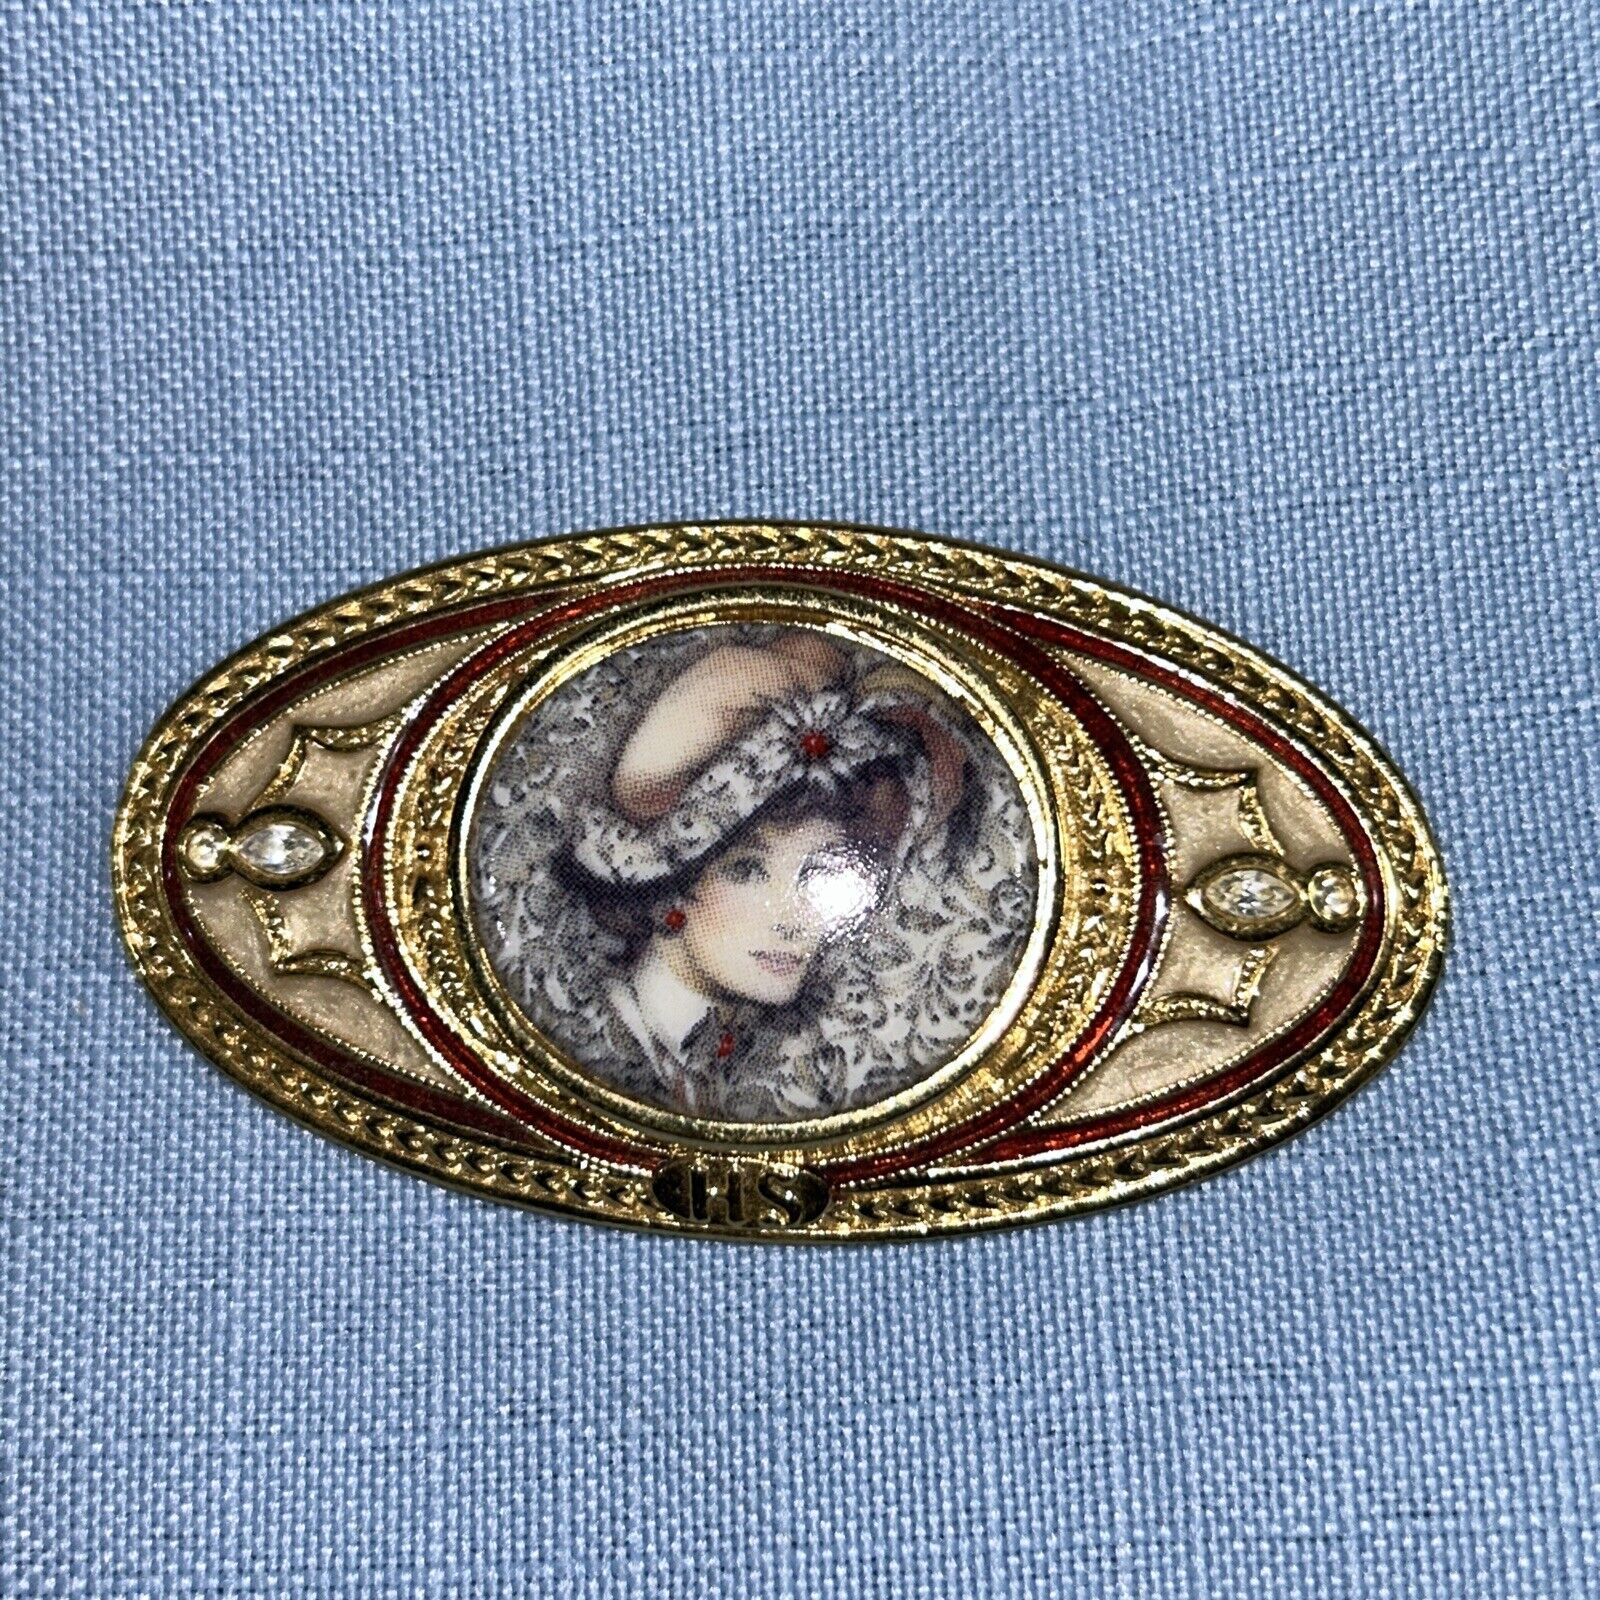 Vintage AVON 97/98 President\'s Club Recognition Award Brooch Oval Pin Ladys Face